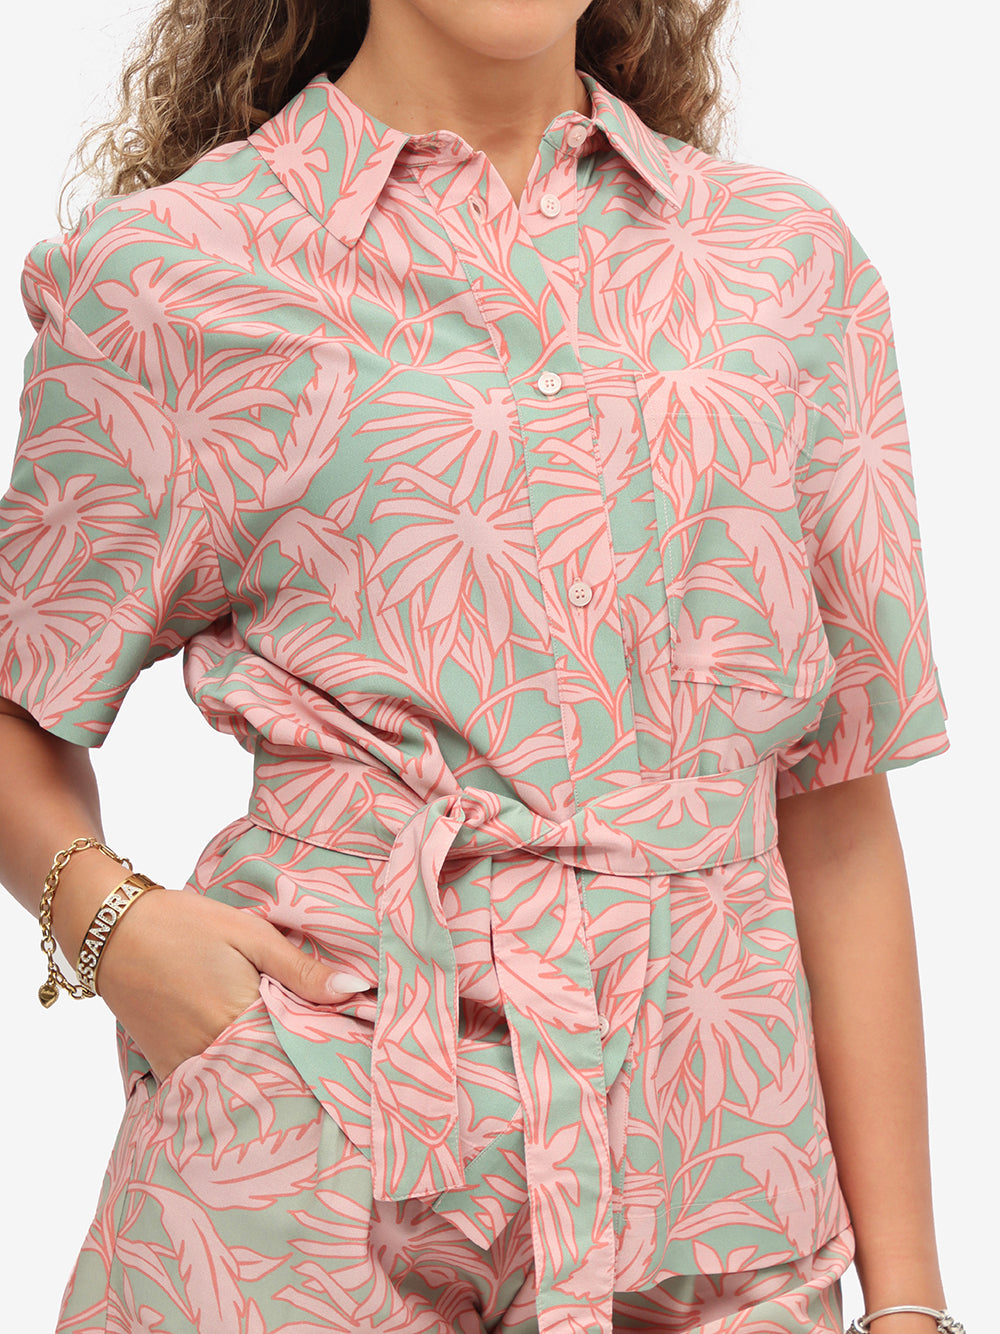 Woolrich Camicia Donna Printed Fluid-Coral Sand Flower